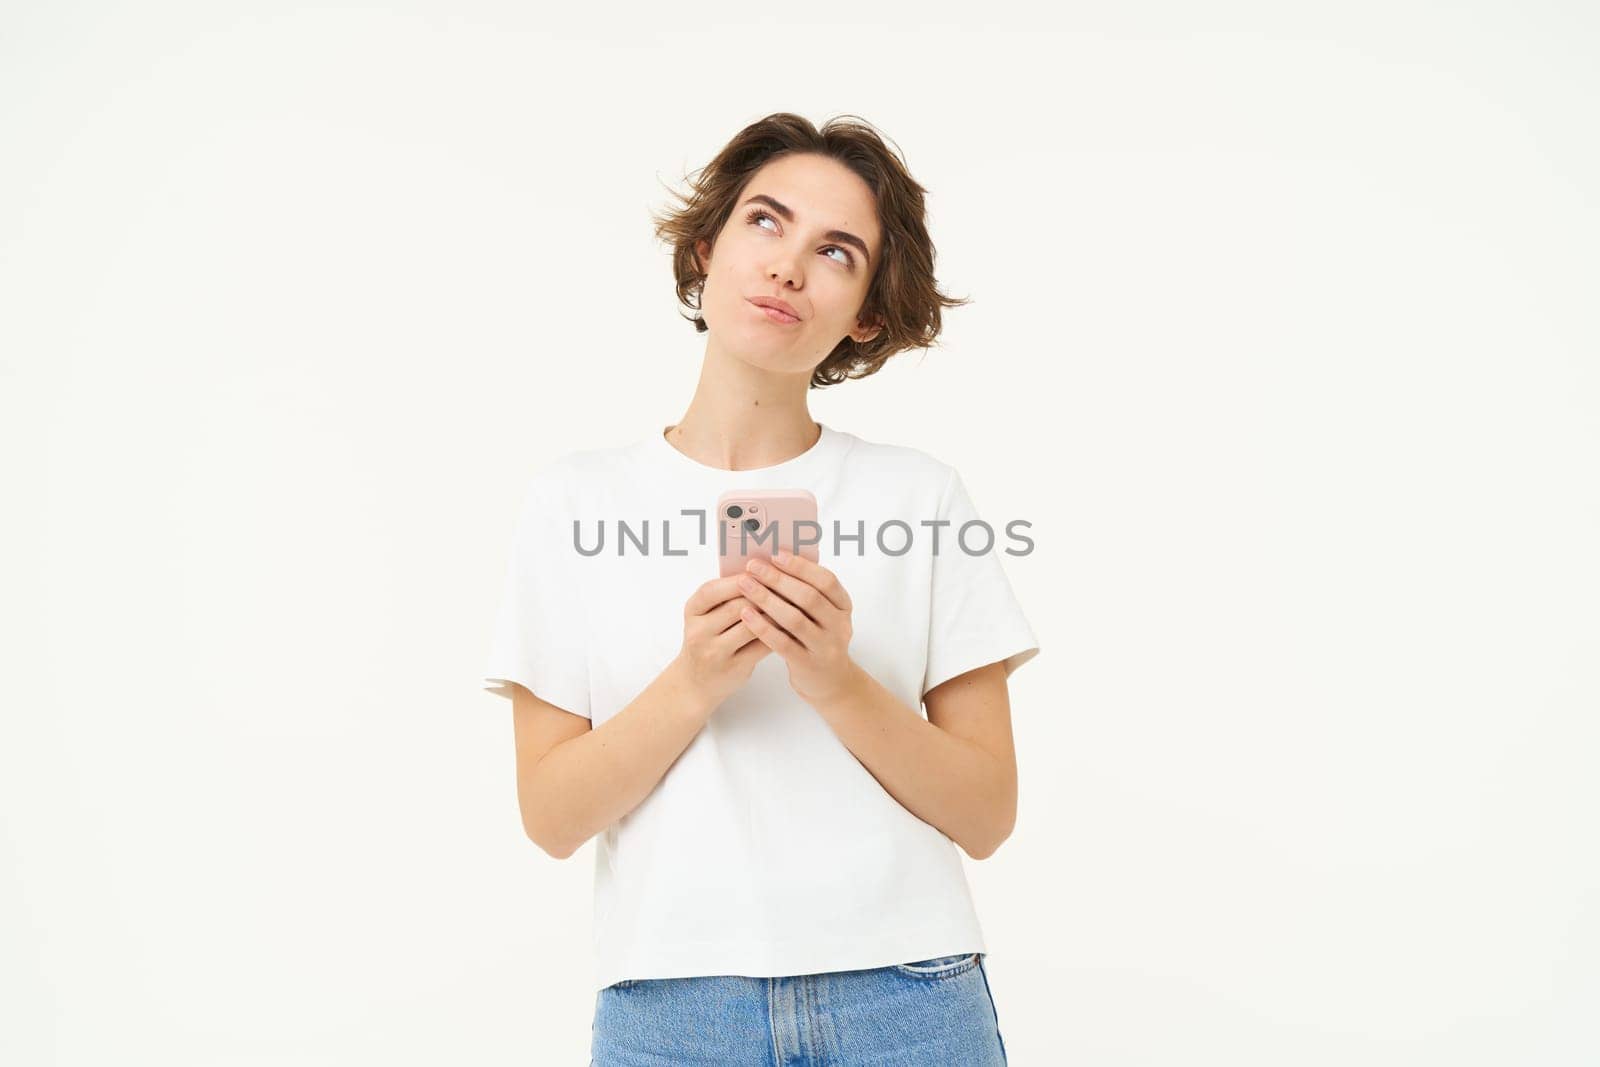 Portrait of thinking girl standing with smartphone, looking up thoughtful, making choice while buying smth online, placing an order, standing over white background.